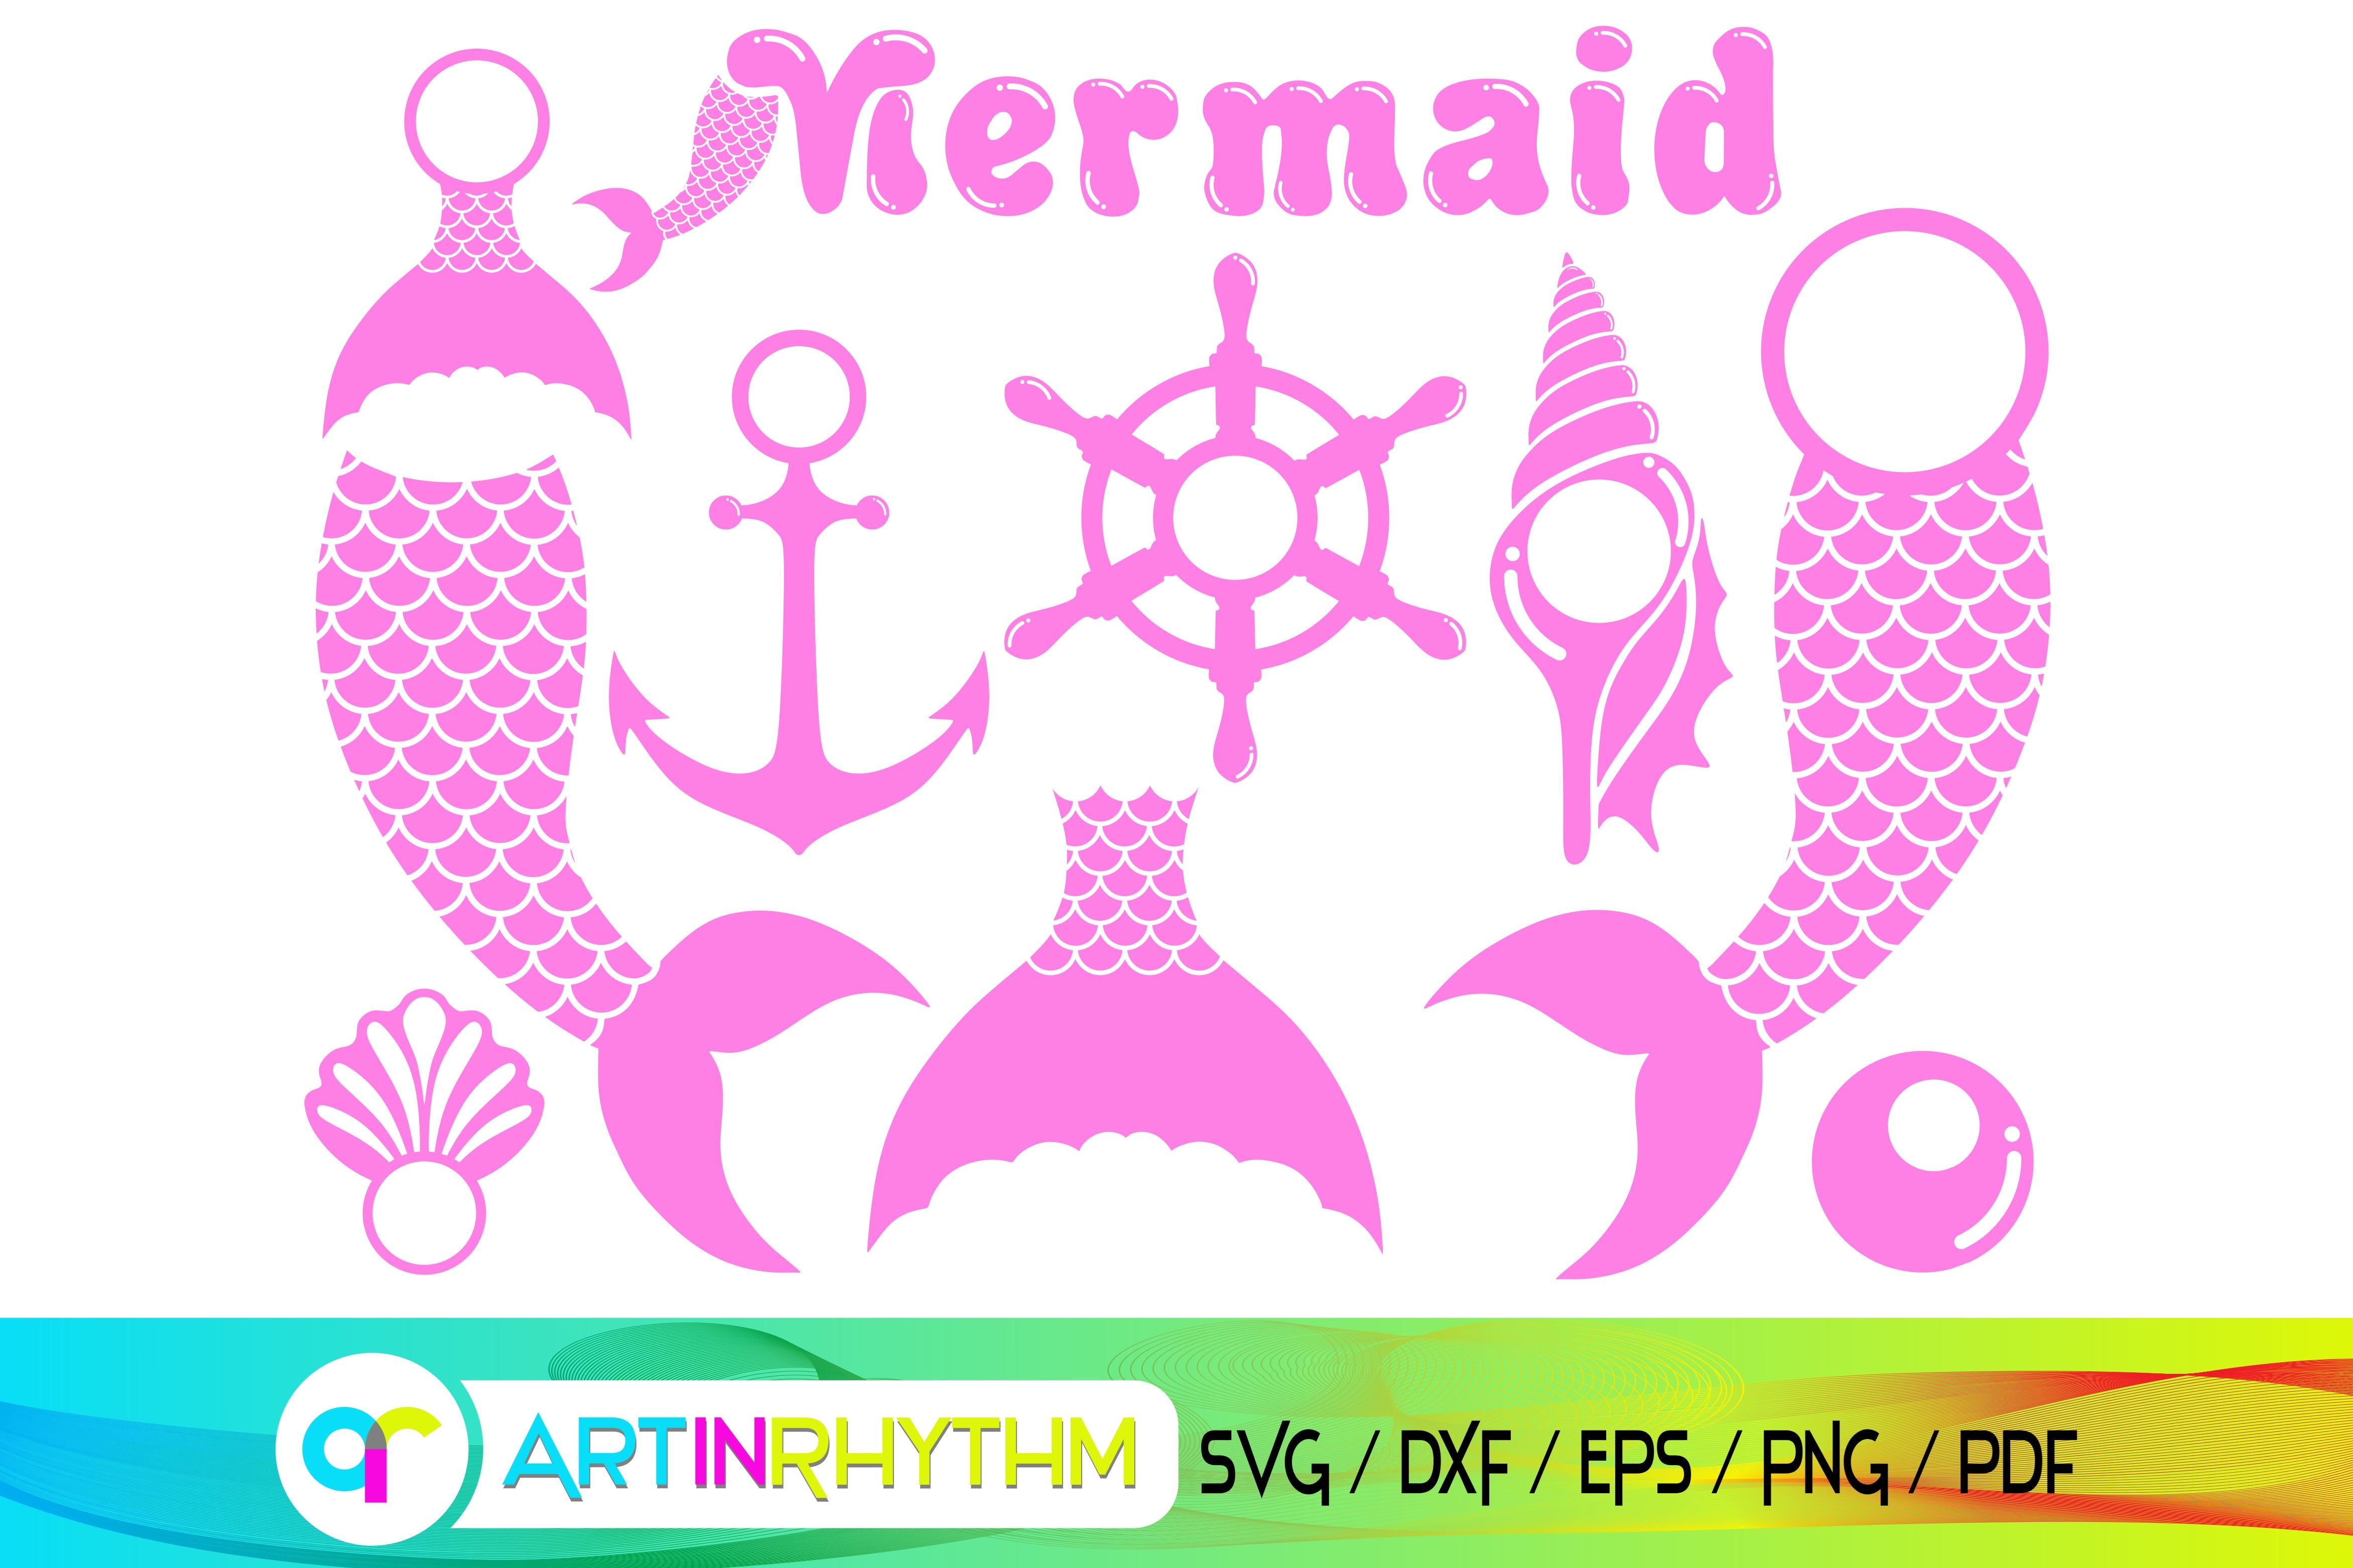 Download Clip Art Shell Svg Mermaid Shell Svg Mermaid Clip Art Mermaid Svg Mermaid Shell Clipart Shell Pearl Cut Files Silhouette Cameo Png Dxf Art Collectibles